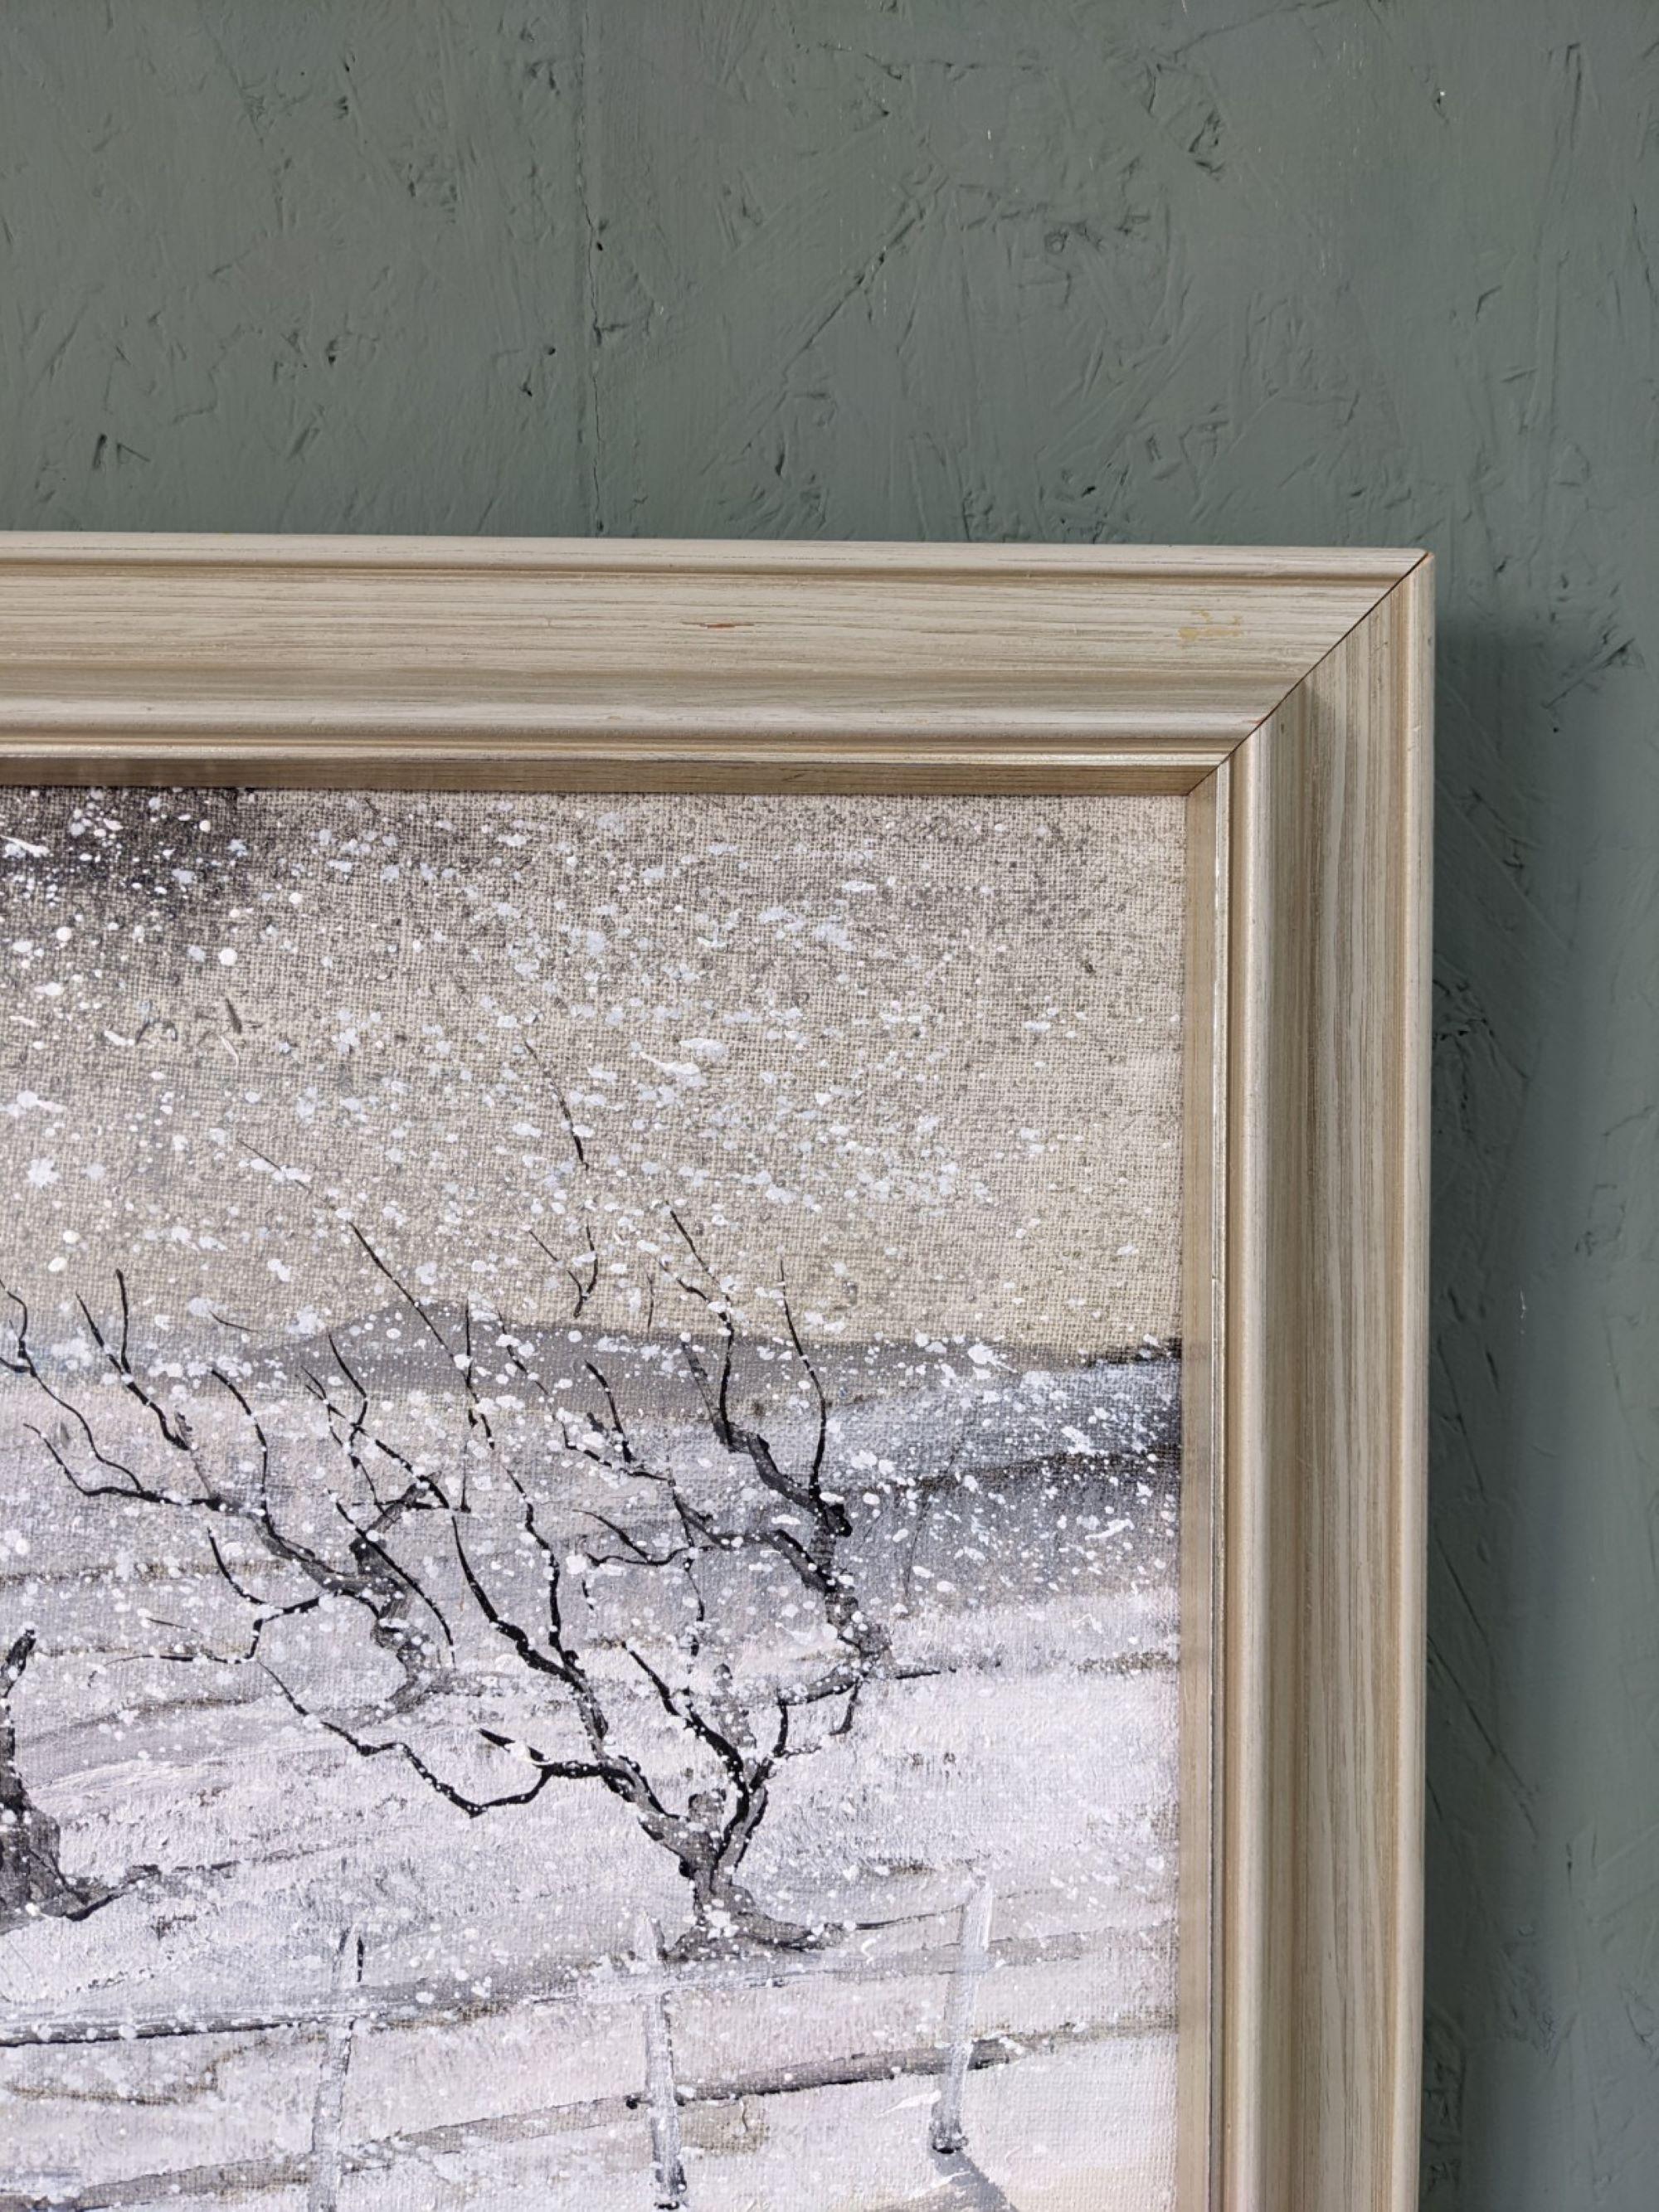 SNOWFALL
Size: 41.5 x 67 cm (including frame)
Oil on canvas

A beautifully detailed mid century winter snow landscape composition, executed in oil onto canvas.

A lone figure is depicted trudging on a pathway through a snow-filled landscape with